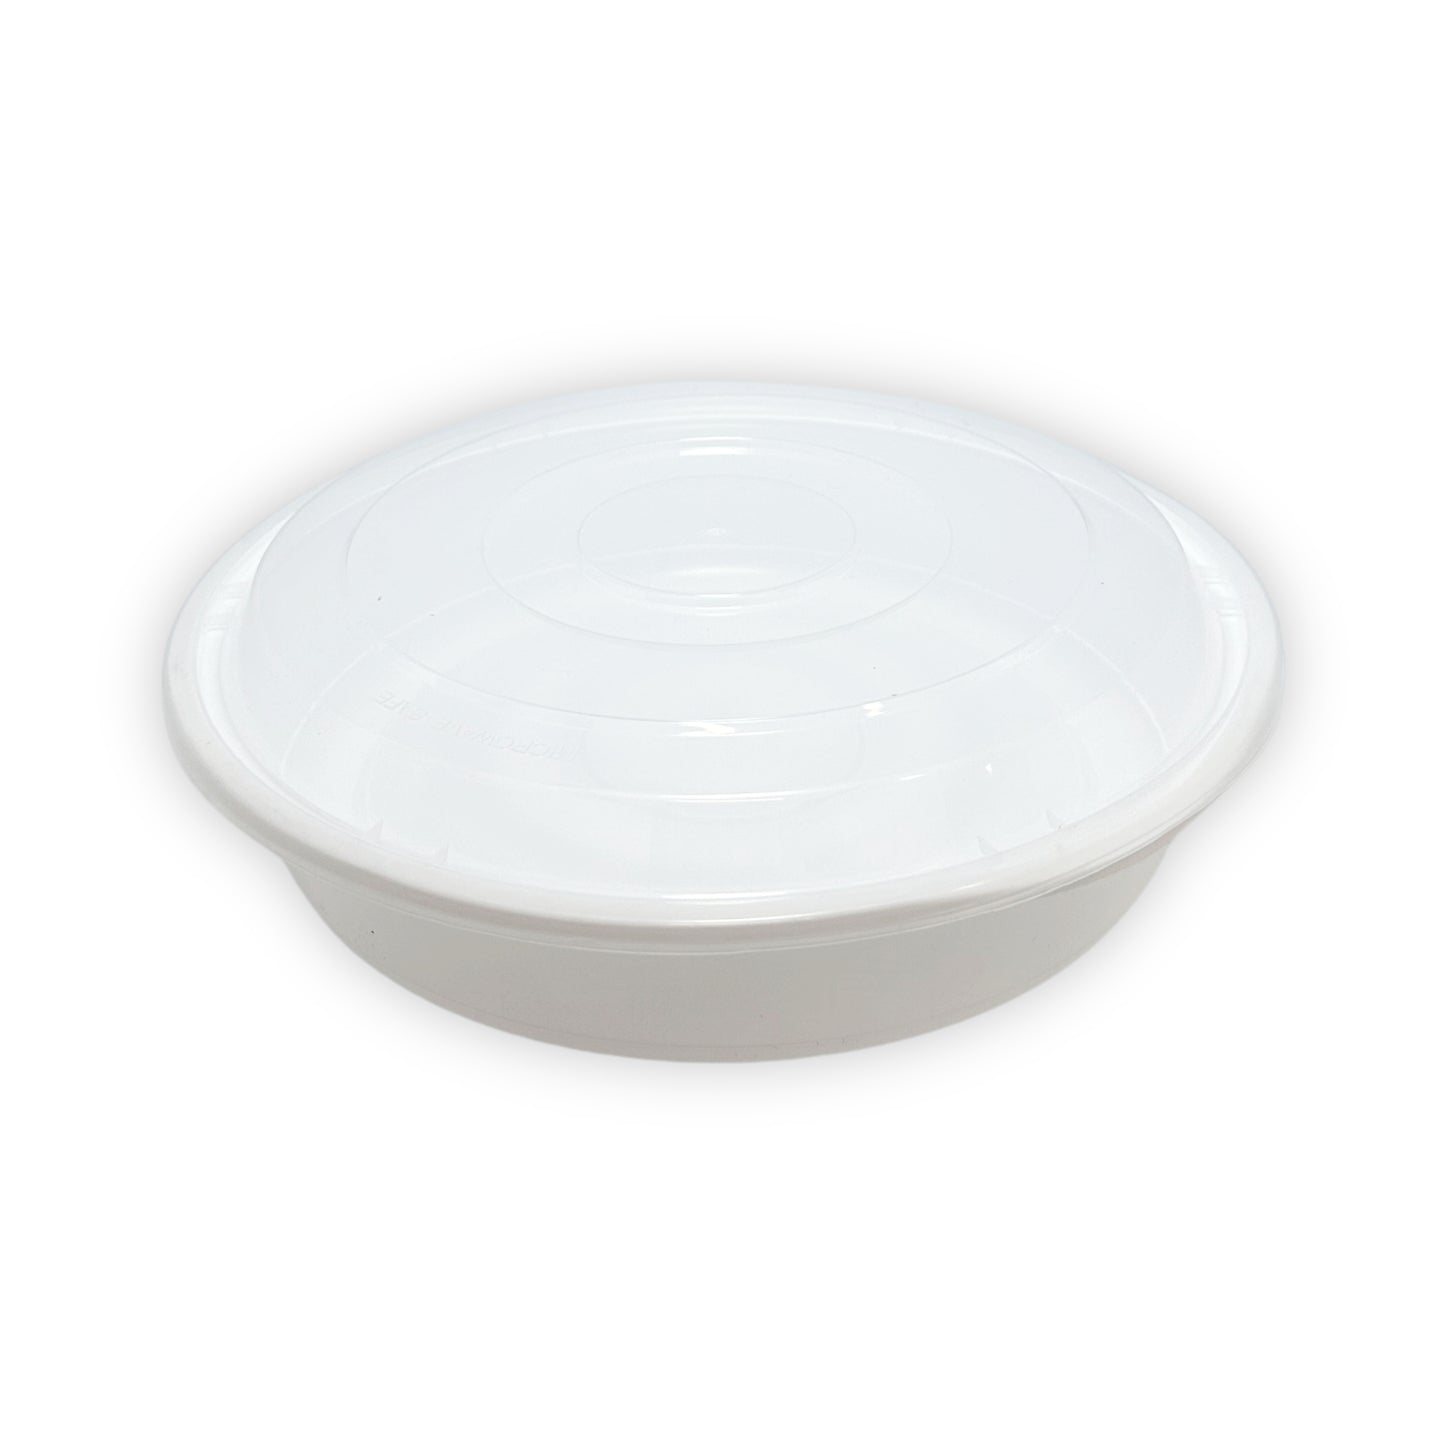 KIS-R48G | 150sets 48oz, 1420ml White PP Round 9" Container with Clear Lids Combo; $0.377/set